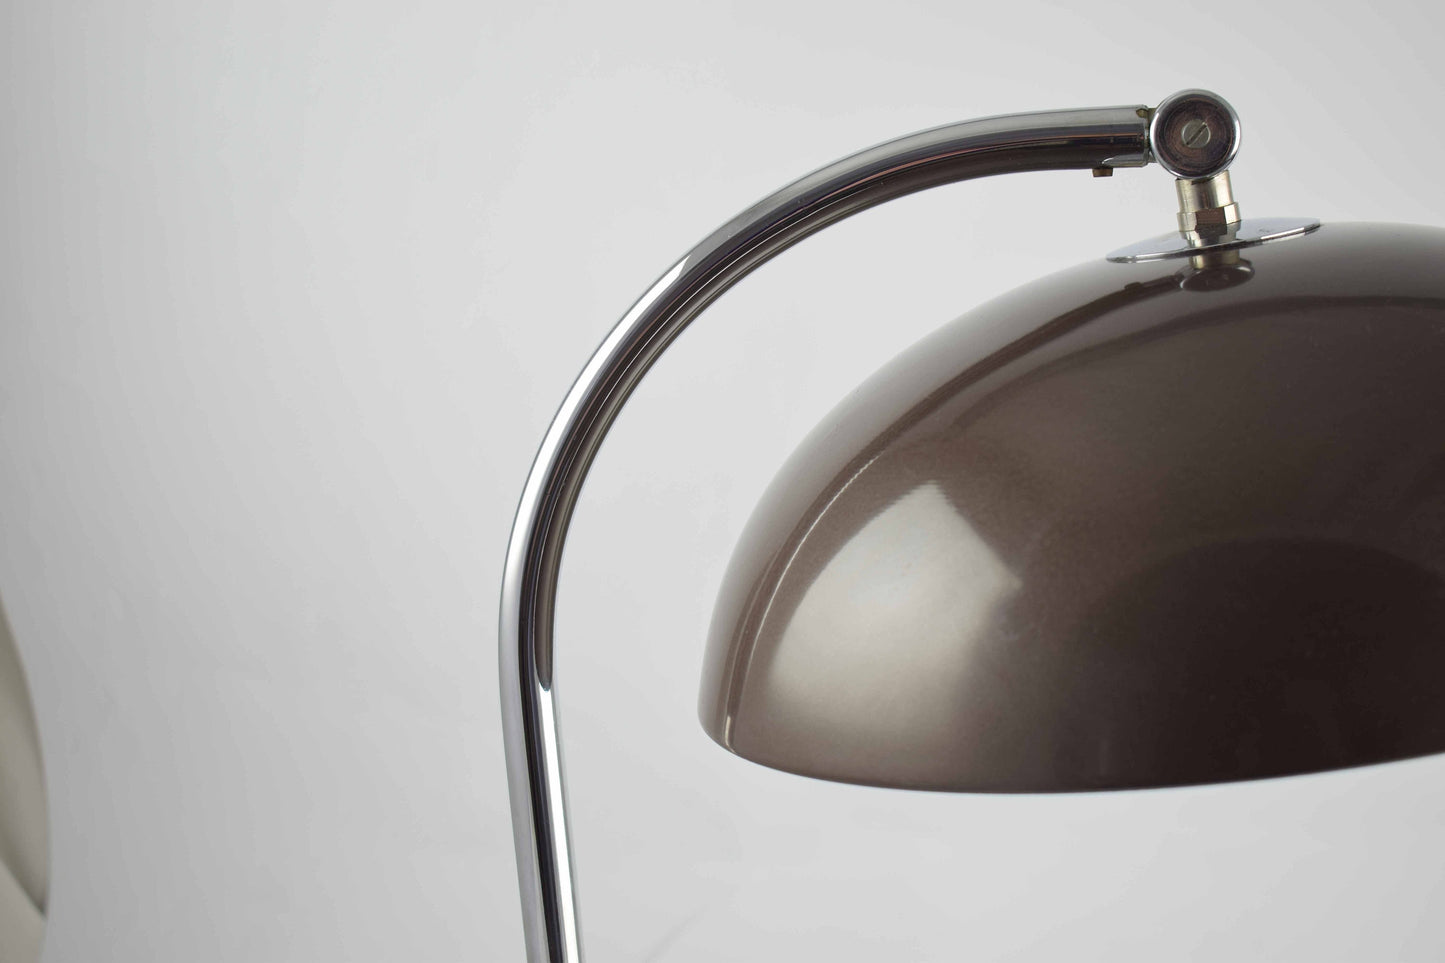 Hala Desk lamp Model 144 designed Busquet, famous brown and chrome design table light from The Netherlands